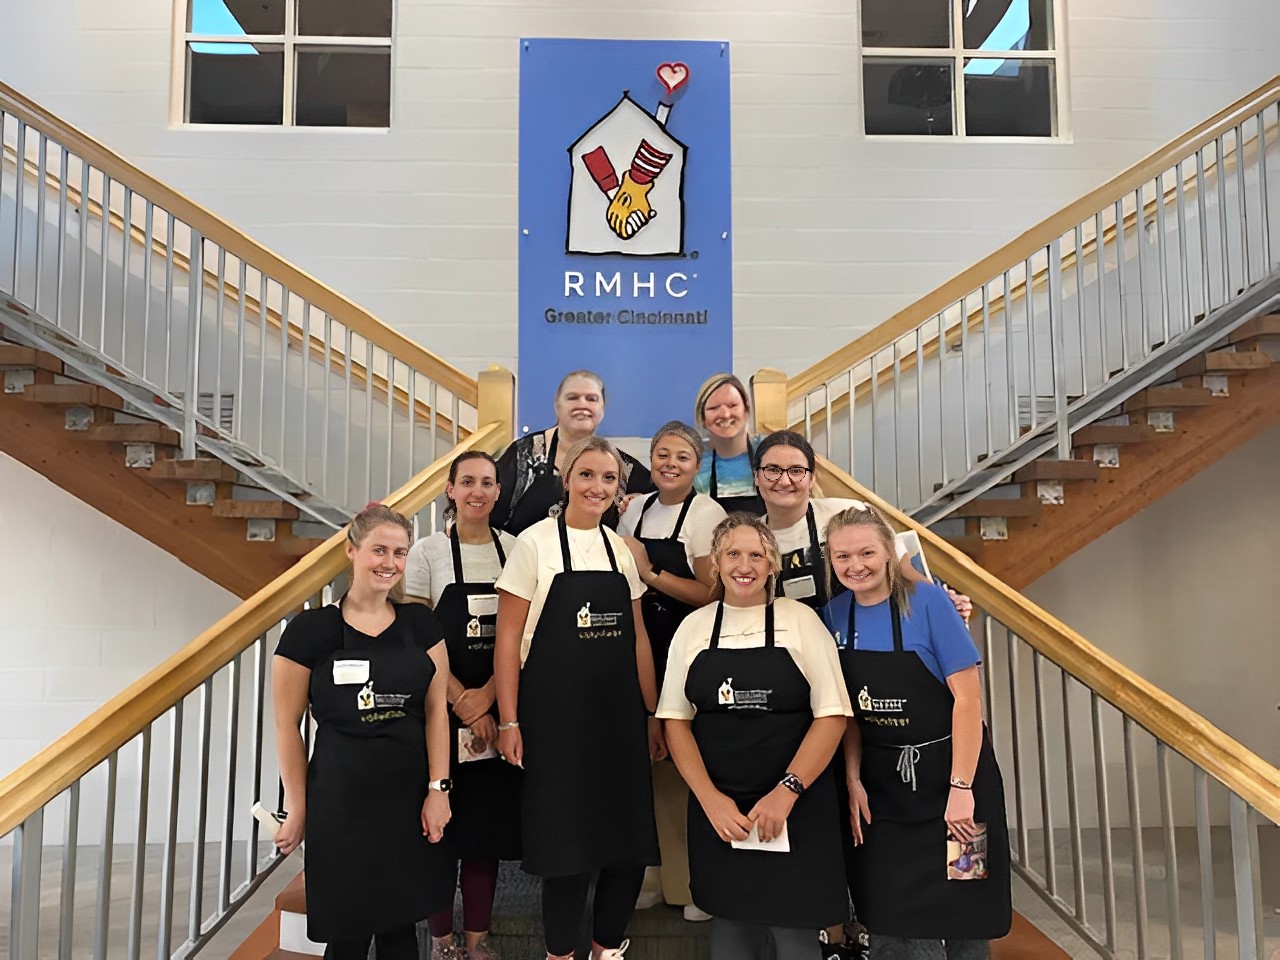 Our BMT nurses prepared and served meals to 178 families at the RMH Cincinnati last night.- Cincy Children’s CBDI